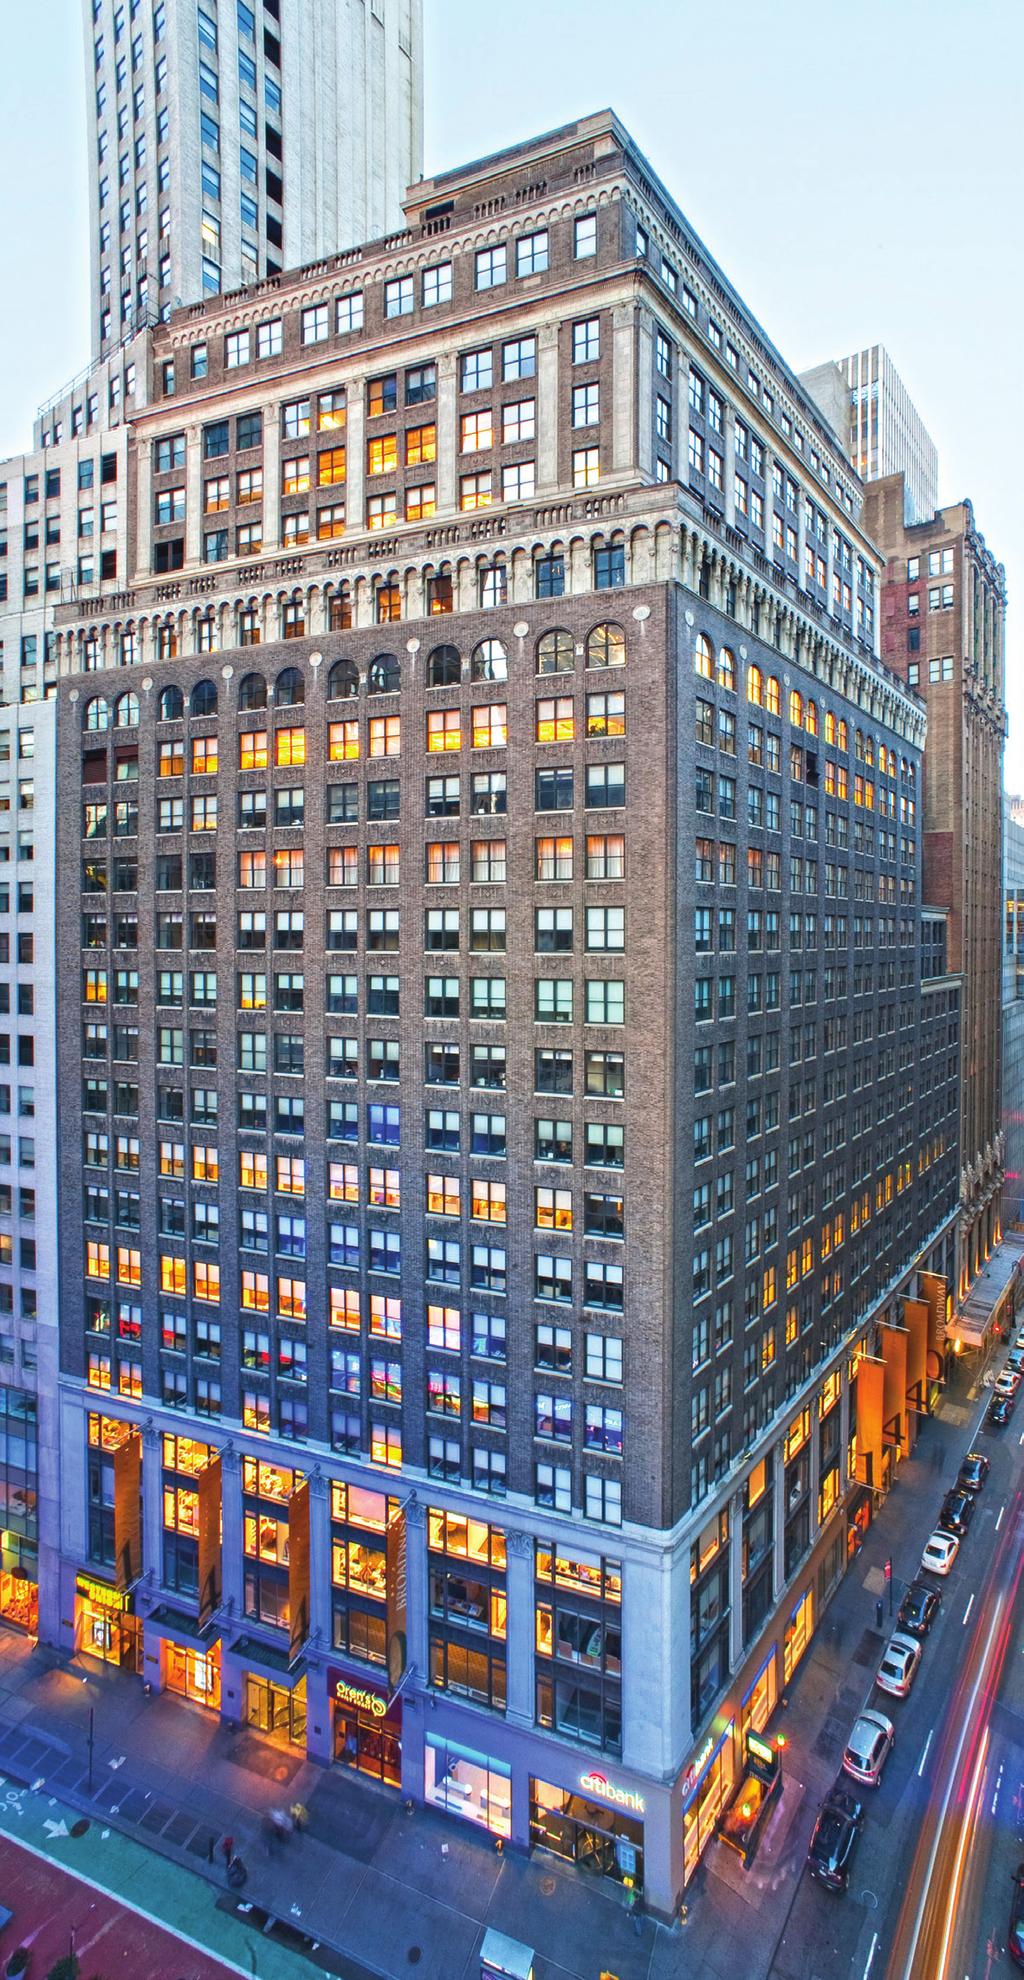 BETWEEN WEST 40TH AND 41ST STREETS FOR DIRECT LEASE FLOORS 11-21 (321,414 SF) PROPERTY INFORMATION RENT Upon request TERM Negotiable AVAILABLE Floors 11 through 17 - Immediate Floors 18